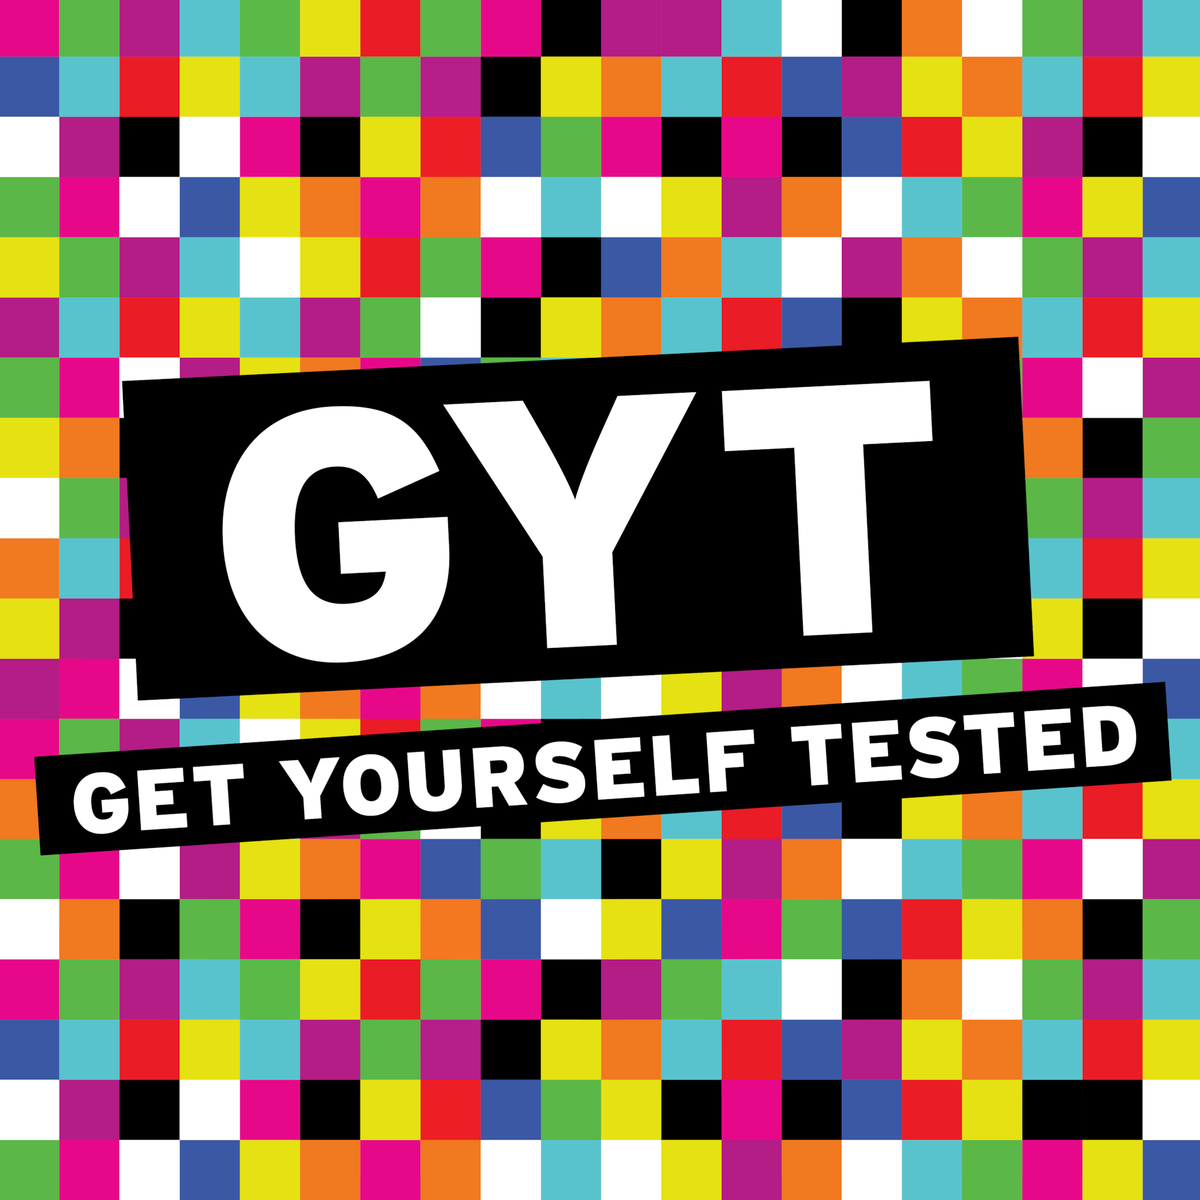 There were over 2.5M cases of chlamydia, gonorrhea and syphilis reported in the U.S. in 2022, but all are treatable. This #STIAwarenessMonth, we're encouraging those who could be at risk of being exposed to an STI to get tested and treated, if necessary. ow.ly/GMsO50RfkxV